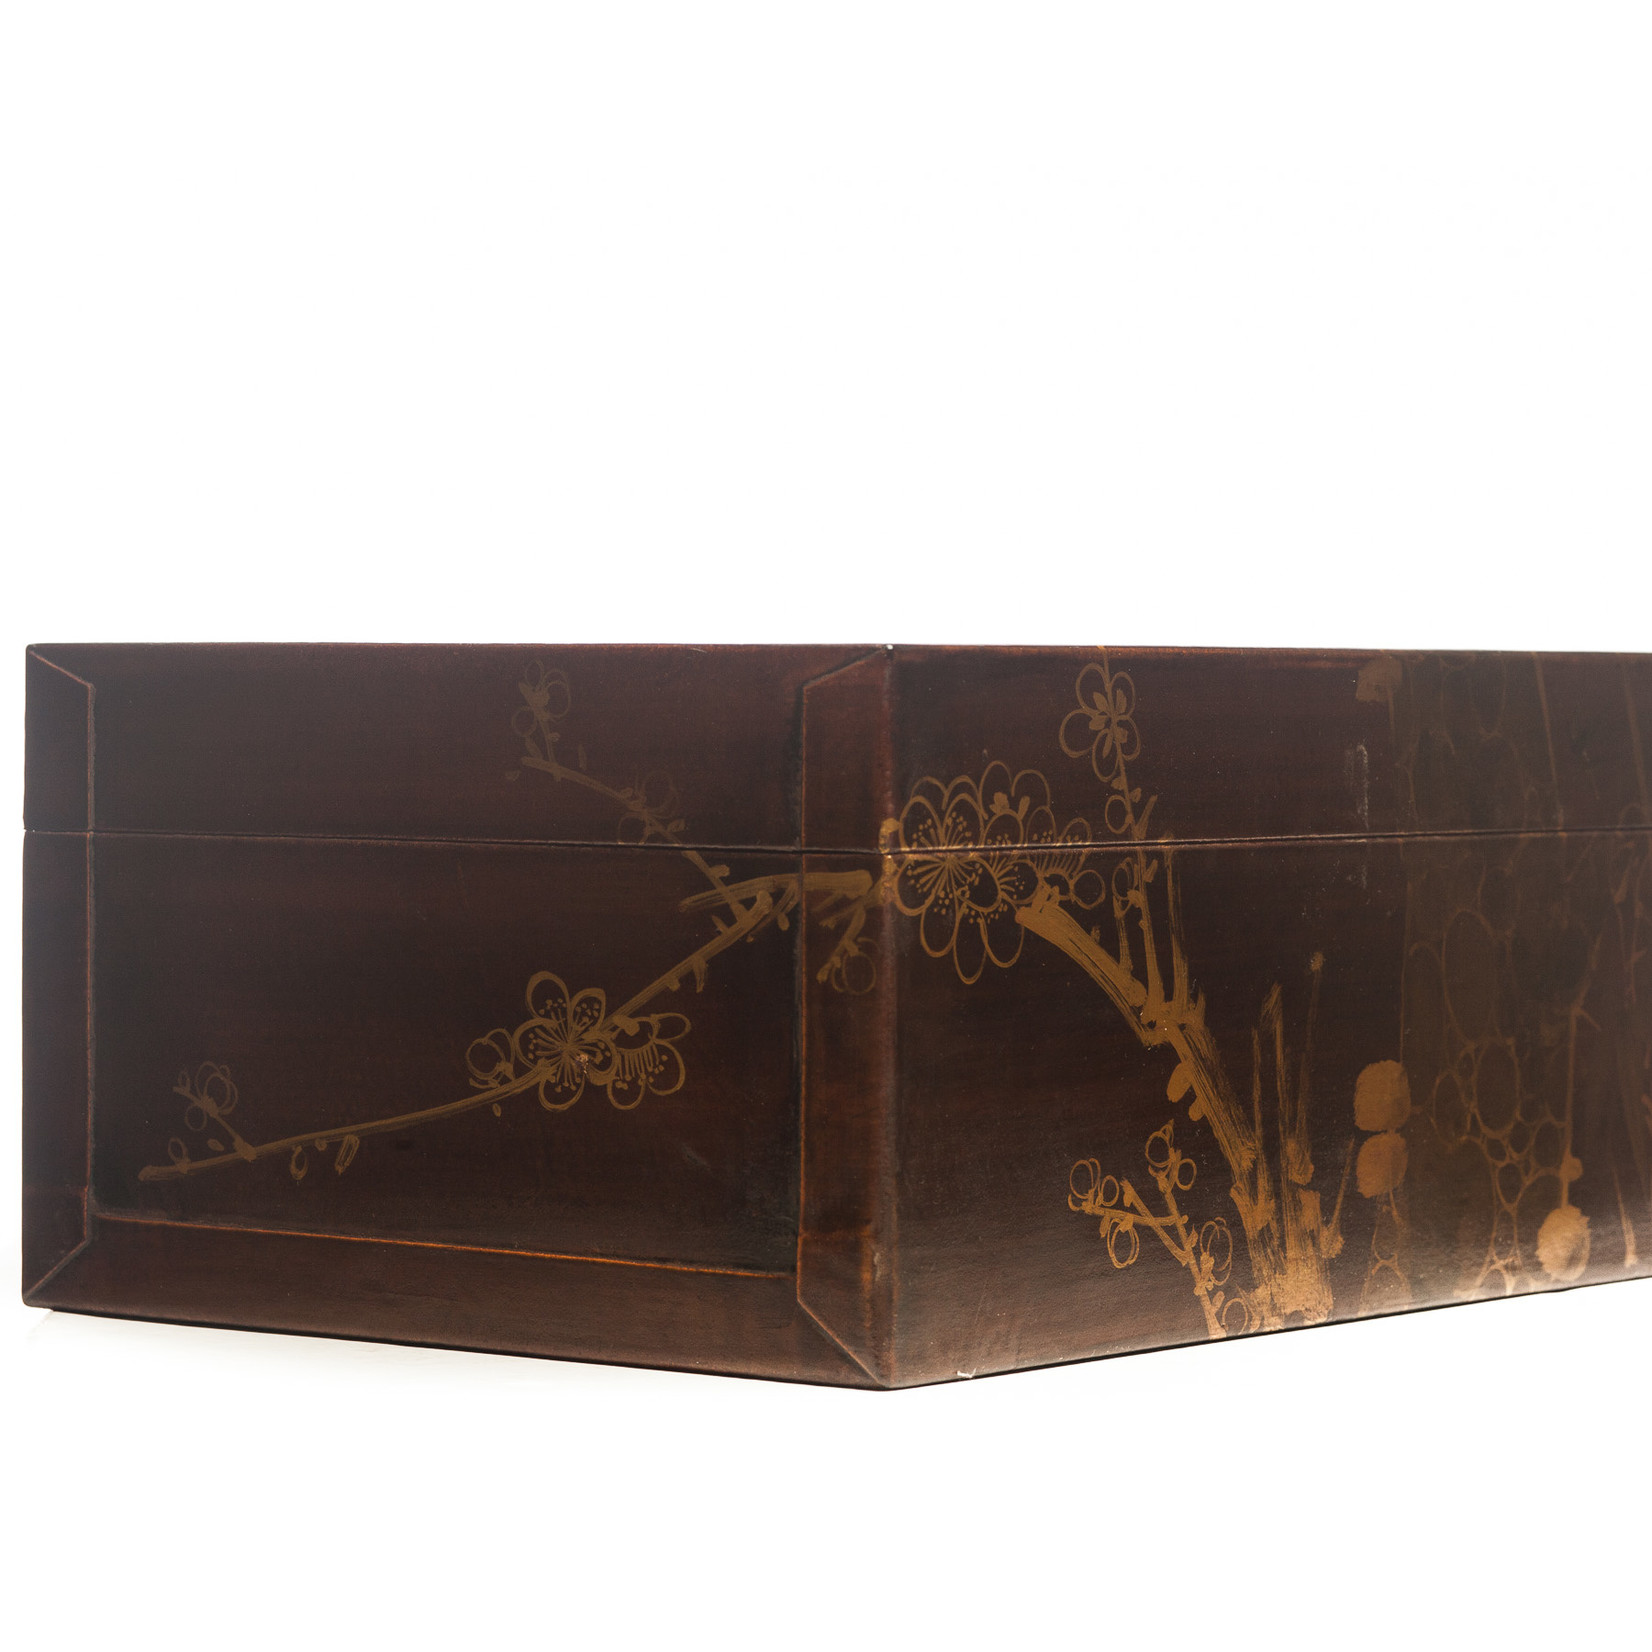 Lawrence & Scott Mahogany Meridian Leather Box ( 16.5") with hand-painted winter motif